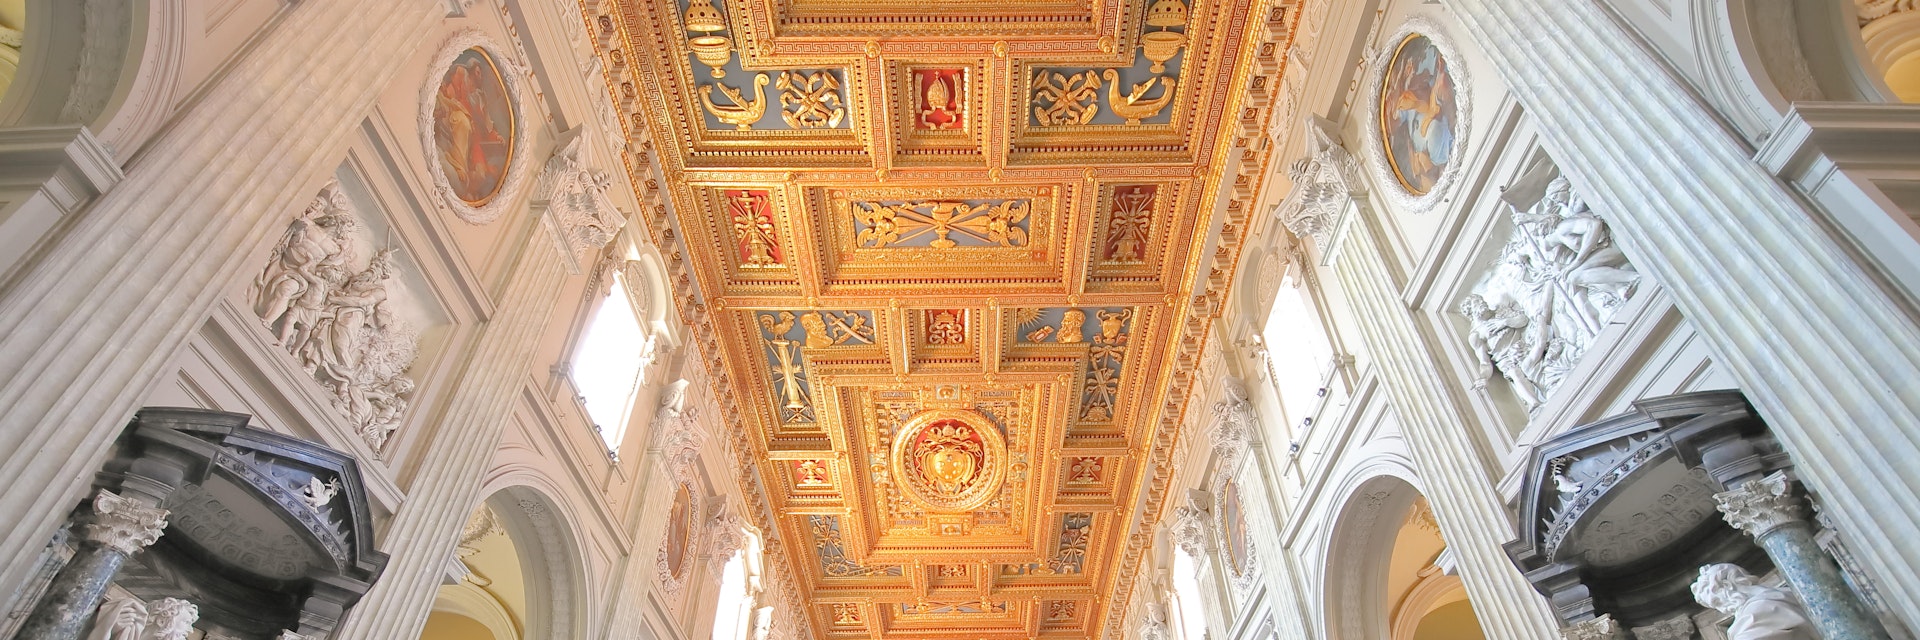 JUNE 17, 2019: Inside the Basilica of San Giovanni in Laterano Church.
1490788748
architecture, basilica, building, cathedral, ceiling, christian, christianity, church, europe, interior, italian, italy, landmark, old, religion, religious, rome, san giovanni, tourism, travel, worship